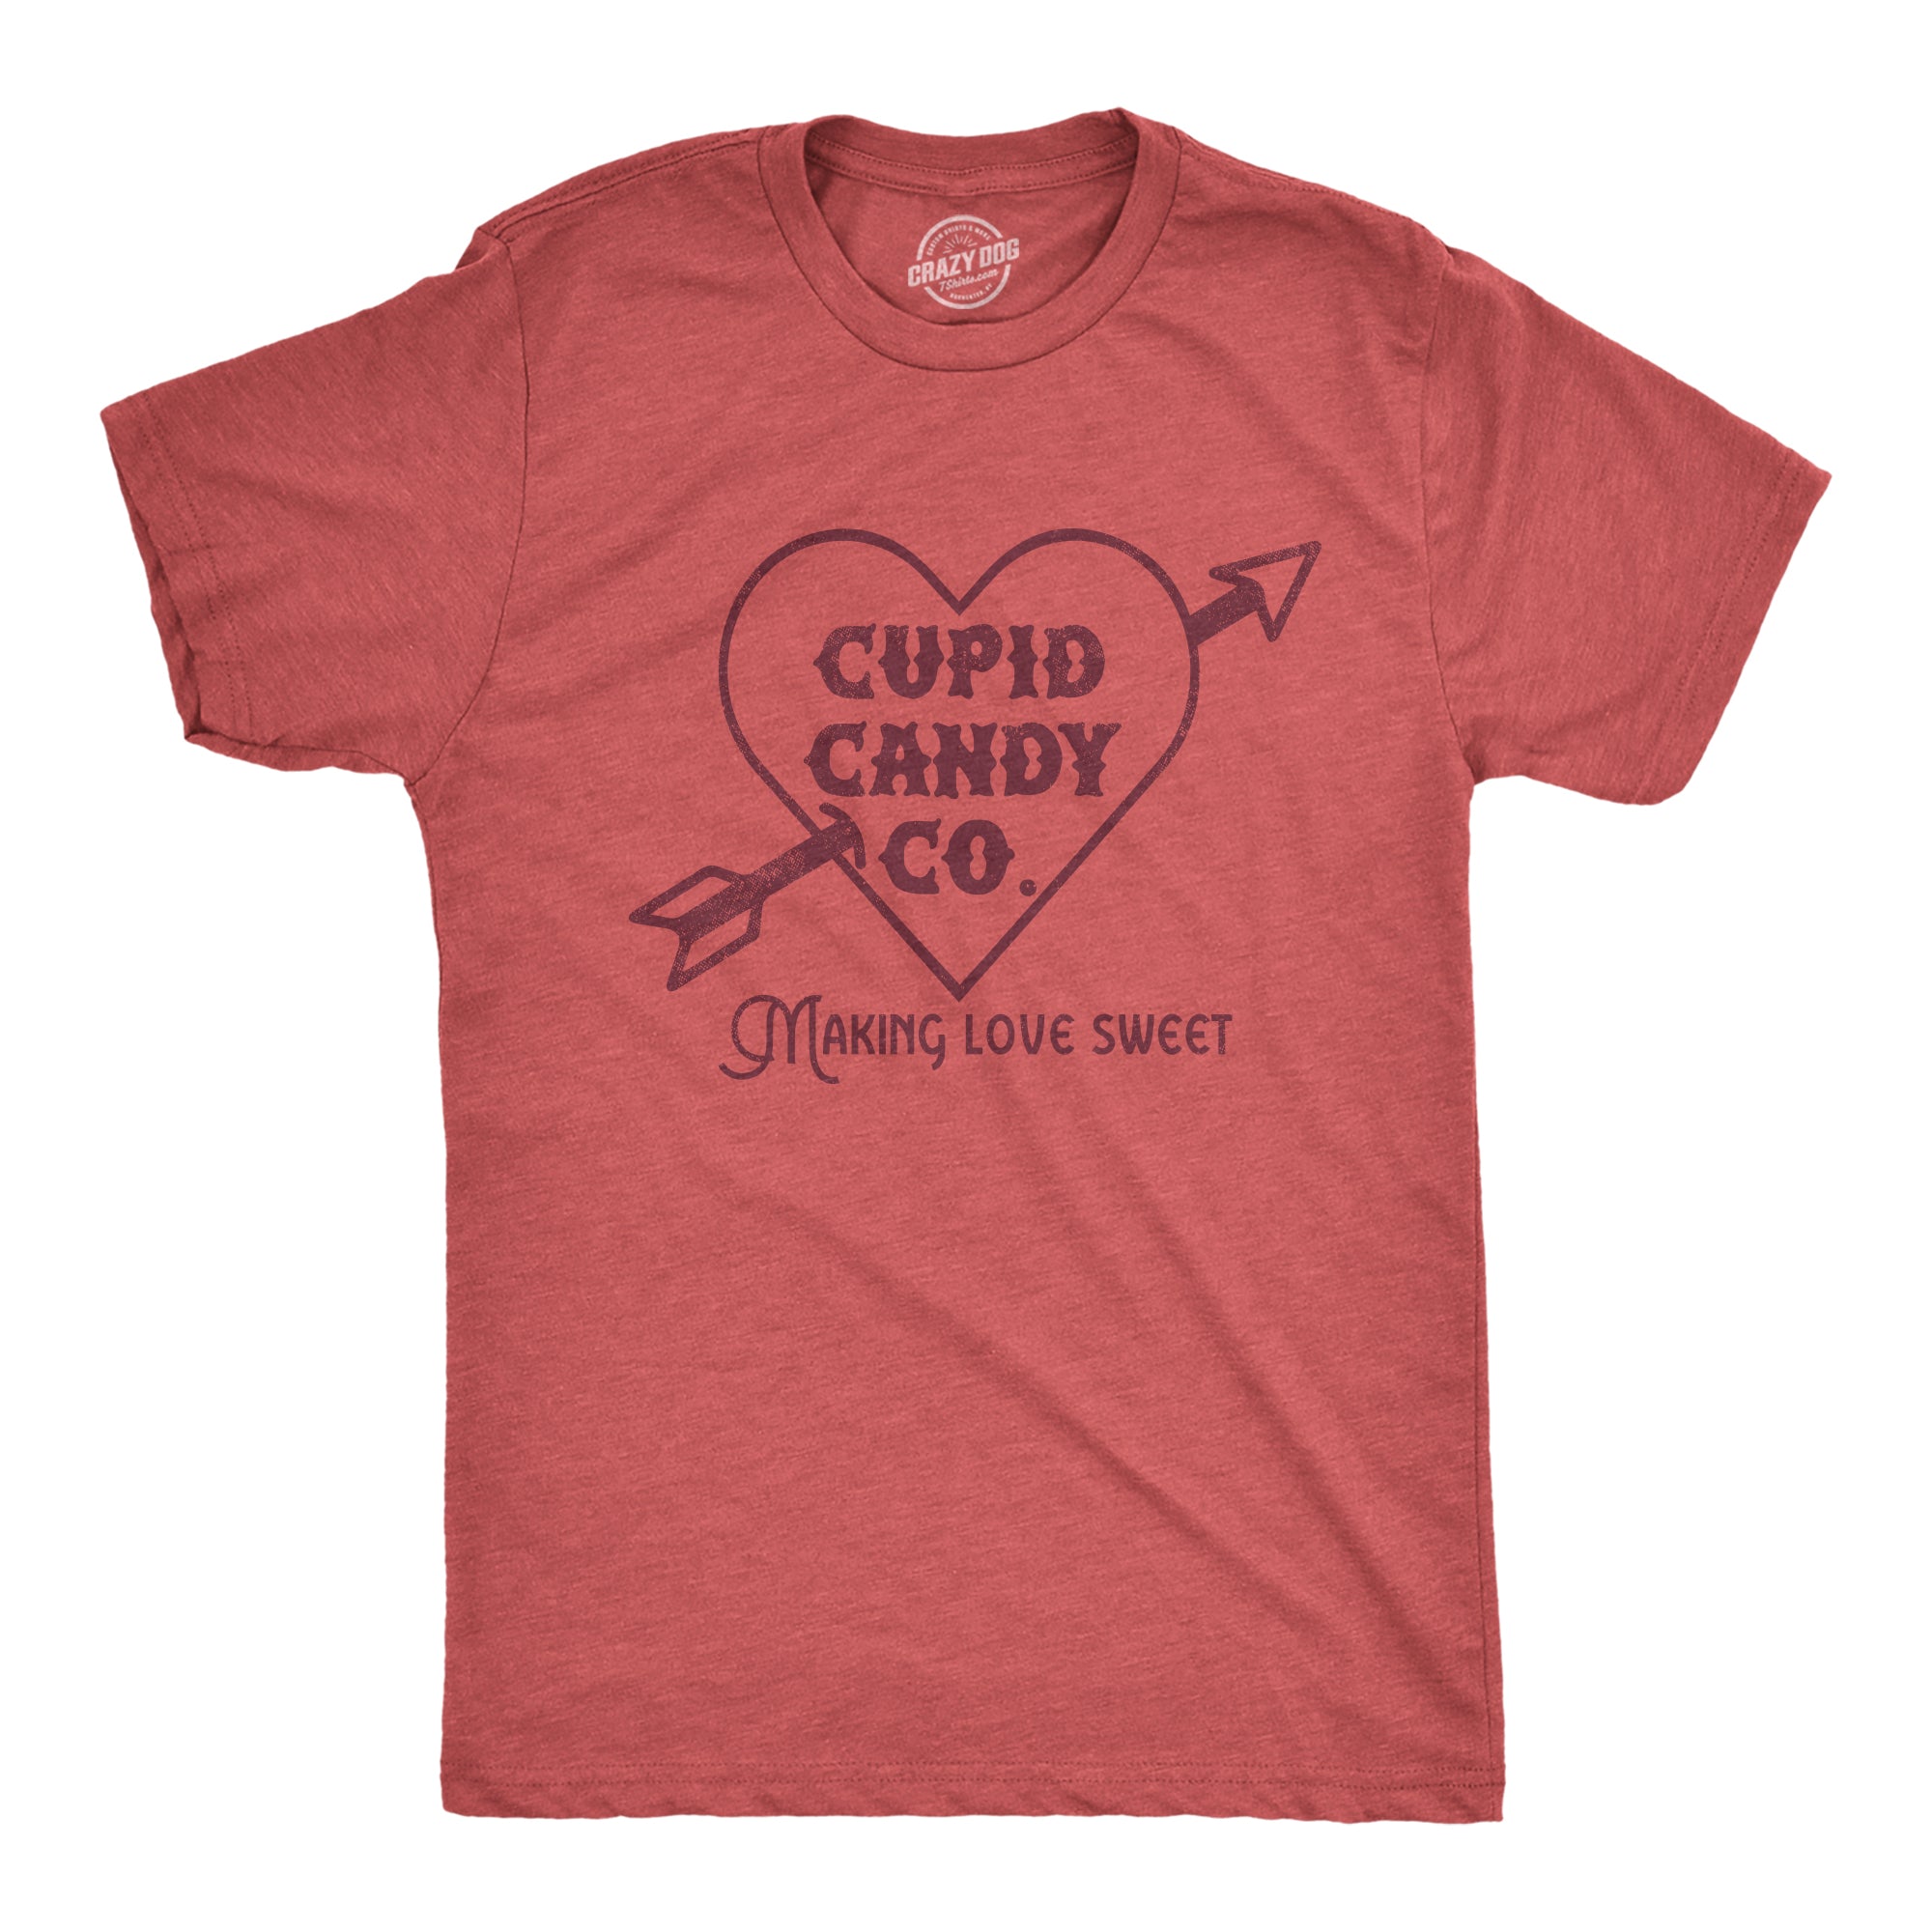 Funny Heather Red - CANDY Cupid Candy Co Mens T Shirt Nerdy Valentine's Day Tee